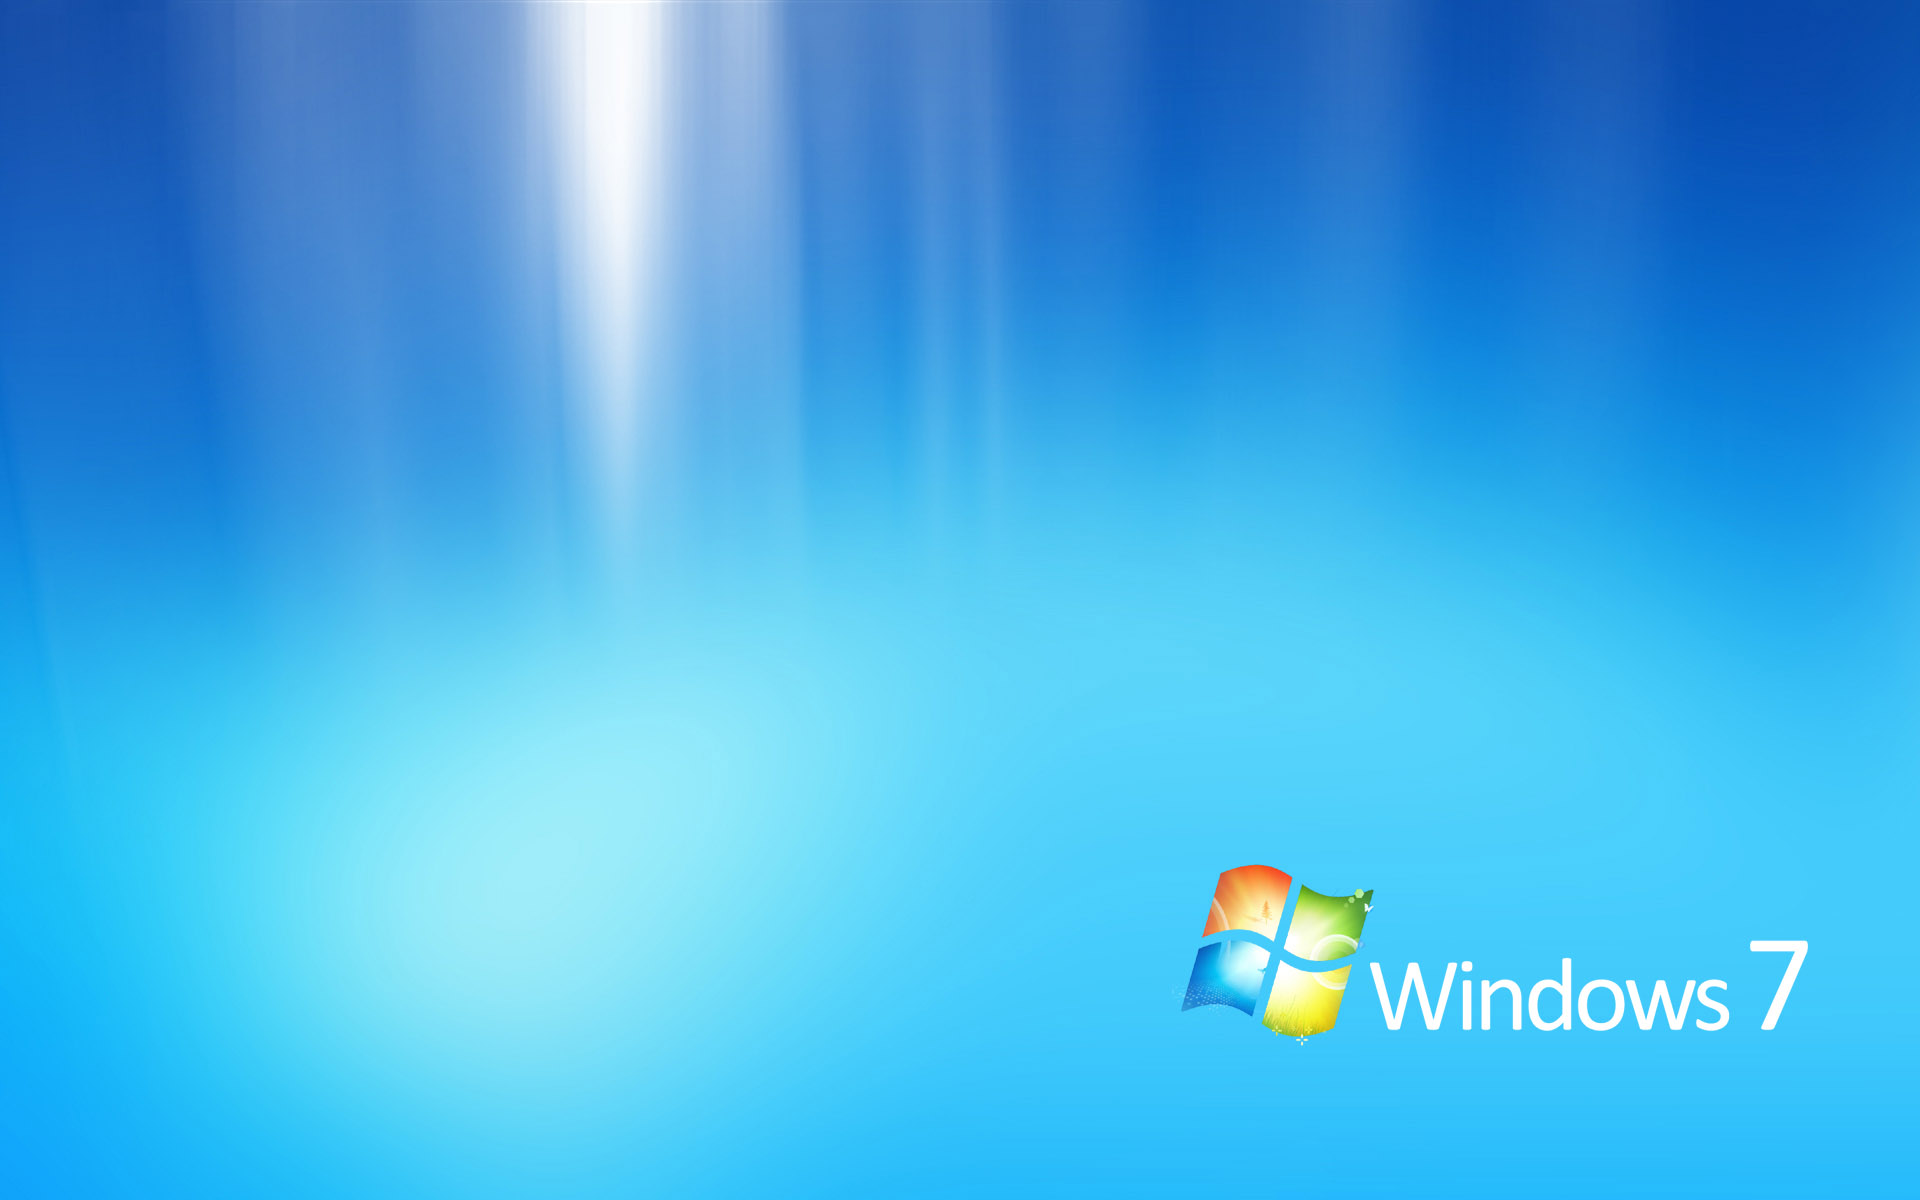 50 Awesome Windows 7 Wallpapers for Your Desktop